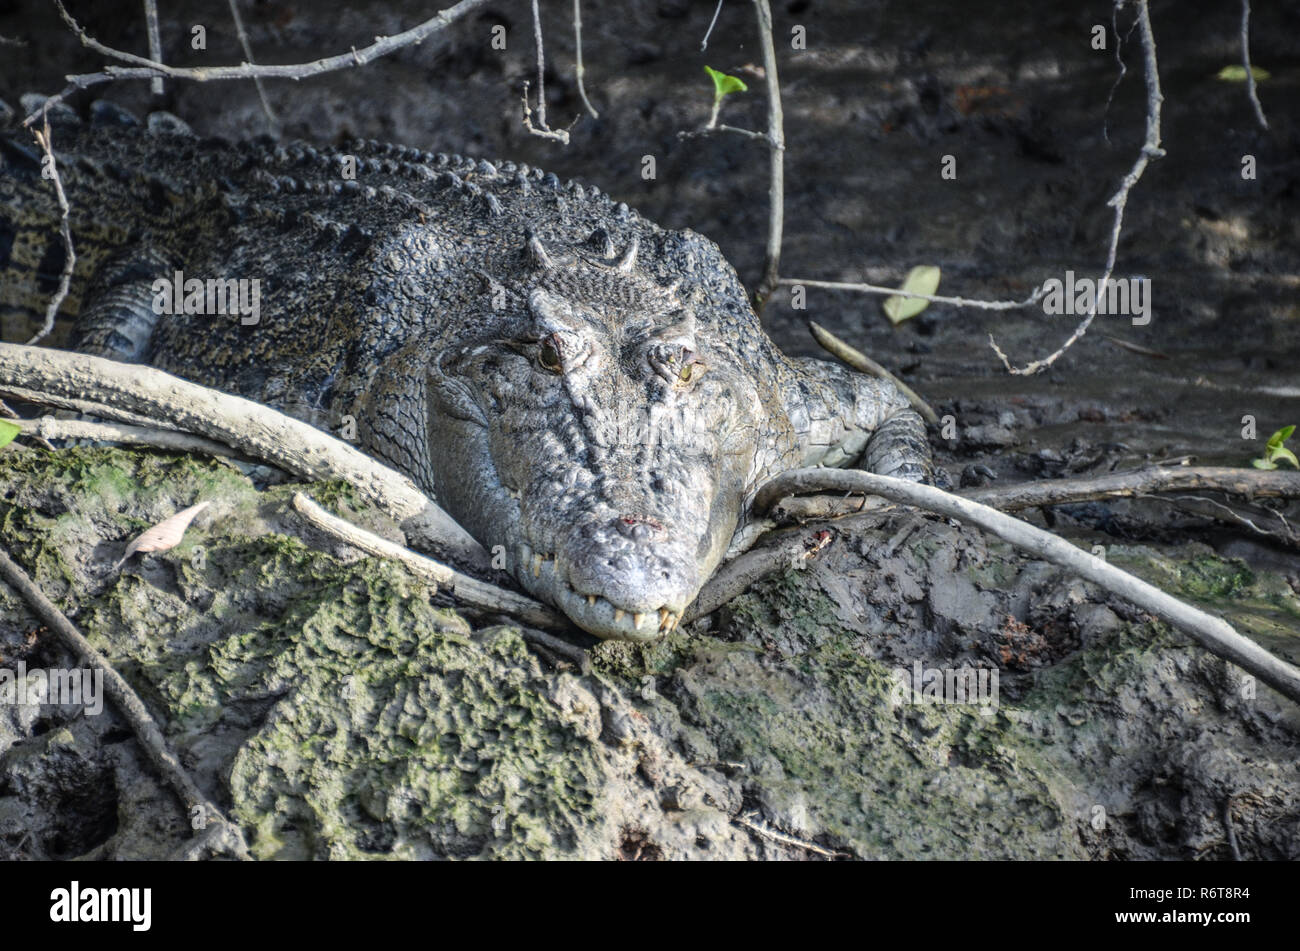 Saltwater Crocodile spotted while cruising Daintree River in Queensland, Australia. Stock Photo